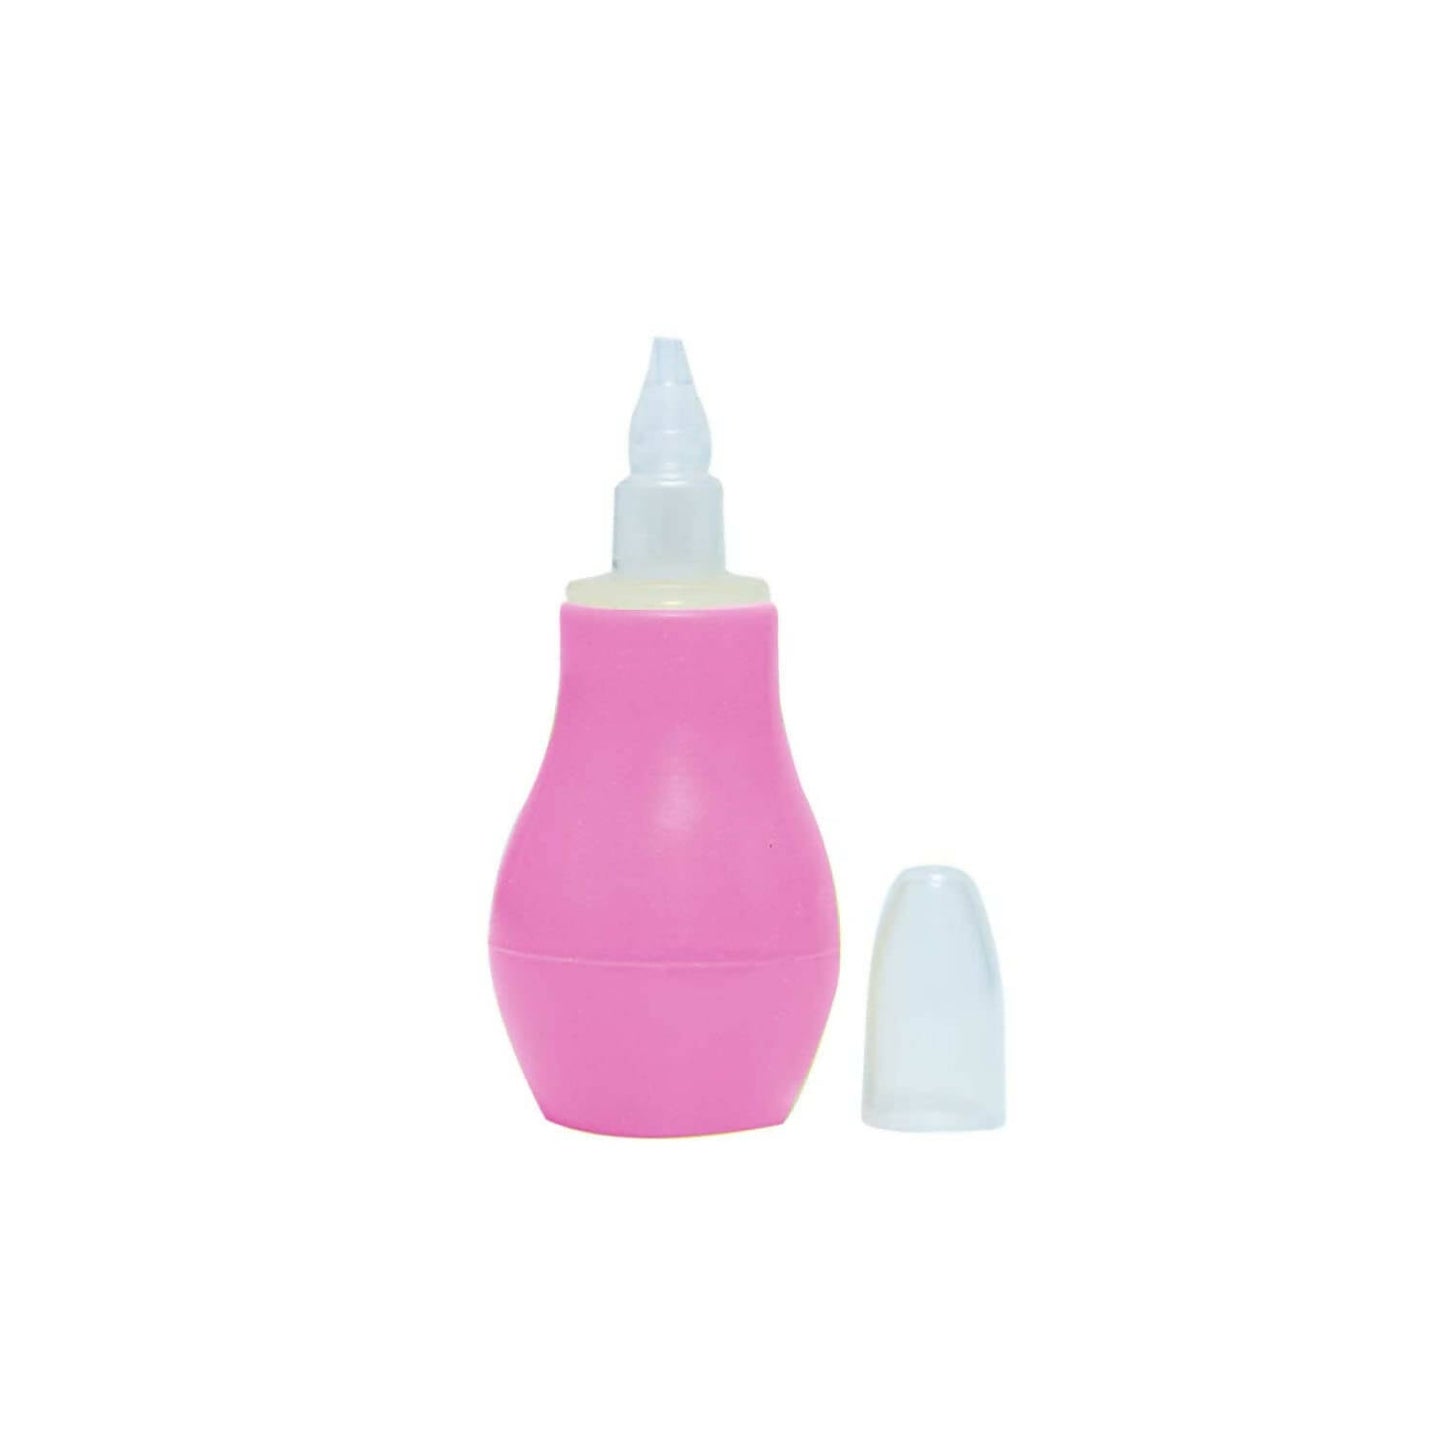 Safe-O-Kid Silicone Baby Nasal Aspirator, Vacuum Sucker, Instant Relief From Blocked Baby Nose Cleaner, Pink -  USA, Australia, Canada 